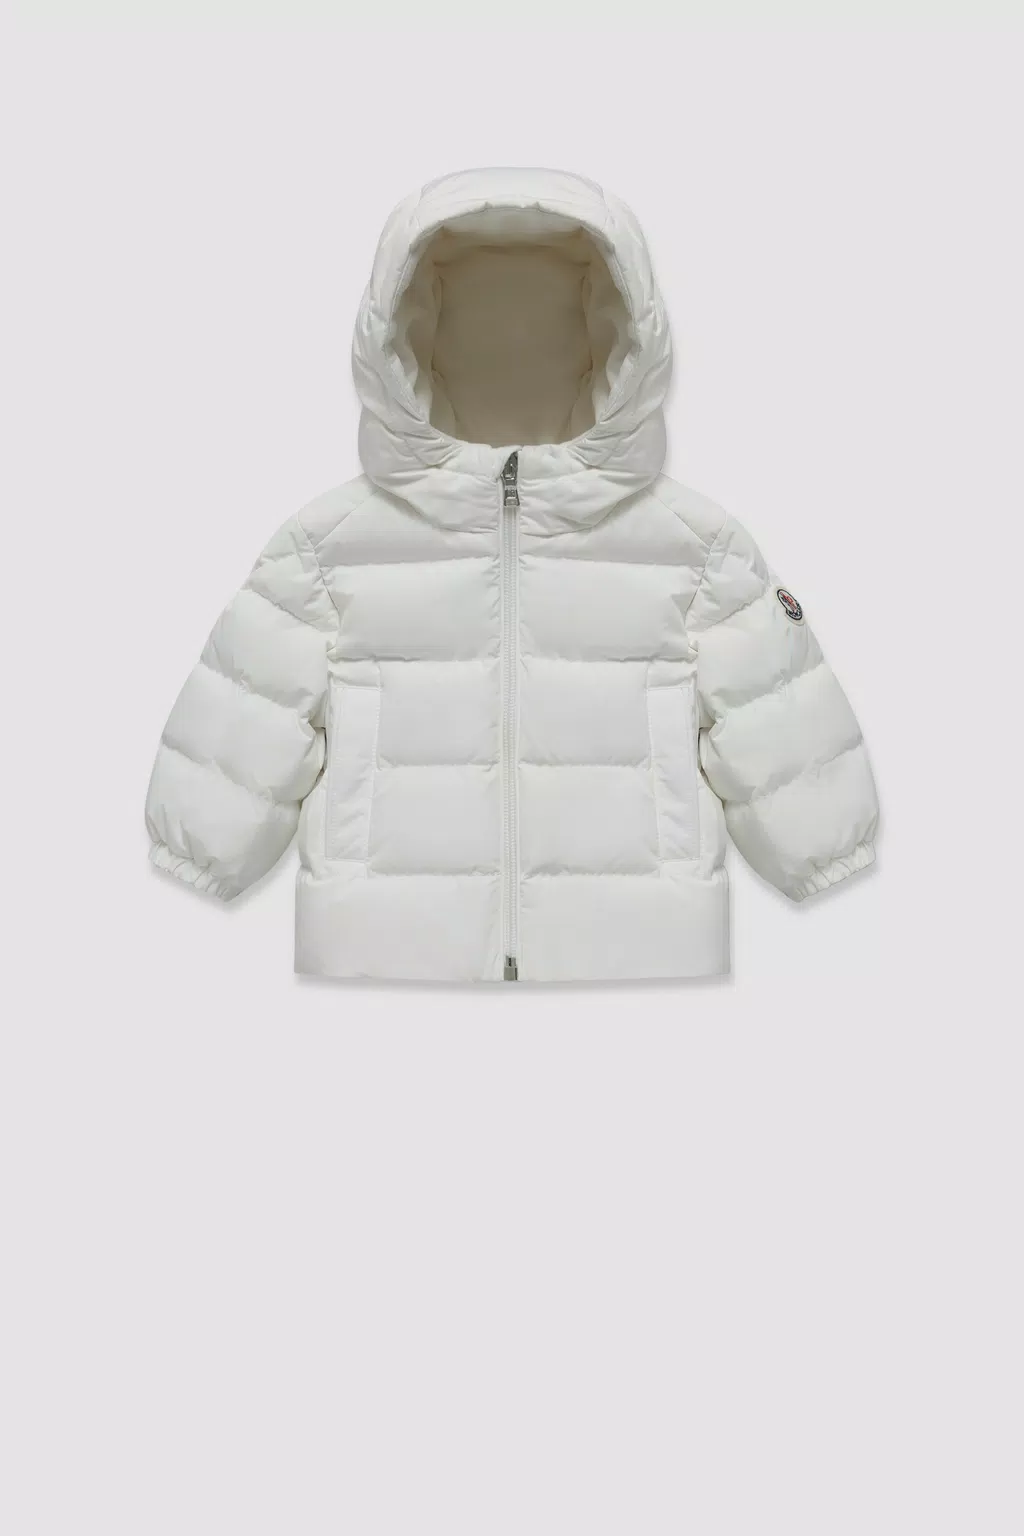 Moncler X Palm Angels Red & Black Synthetic Goose Down Filled